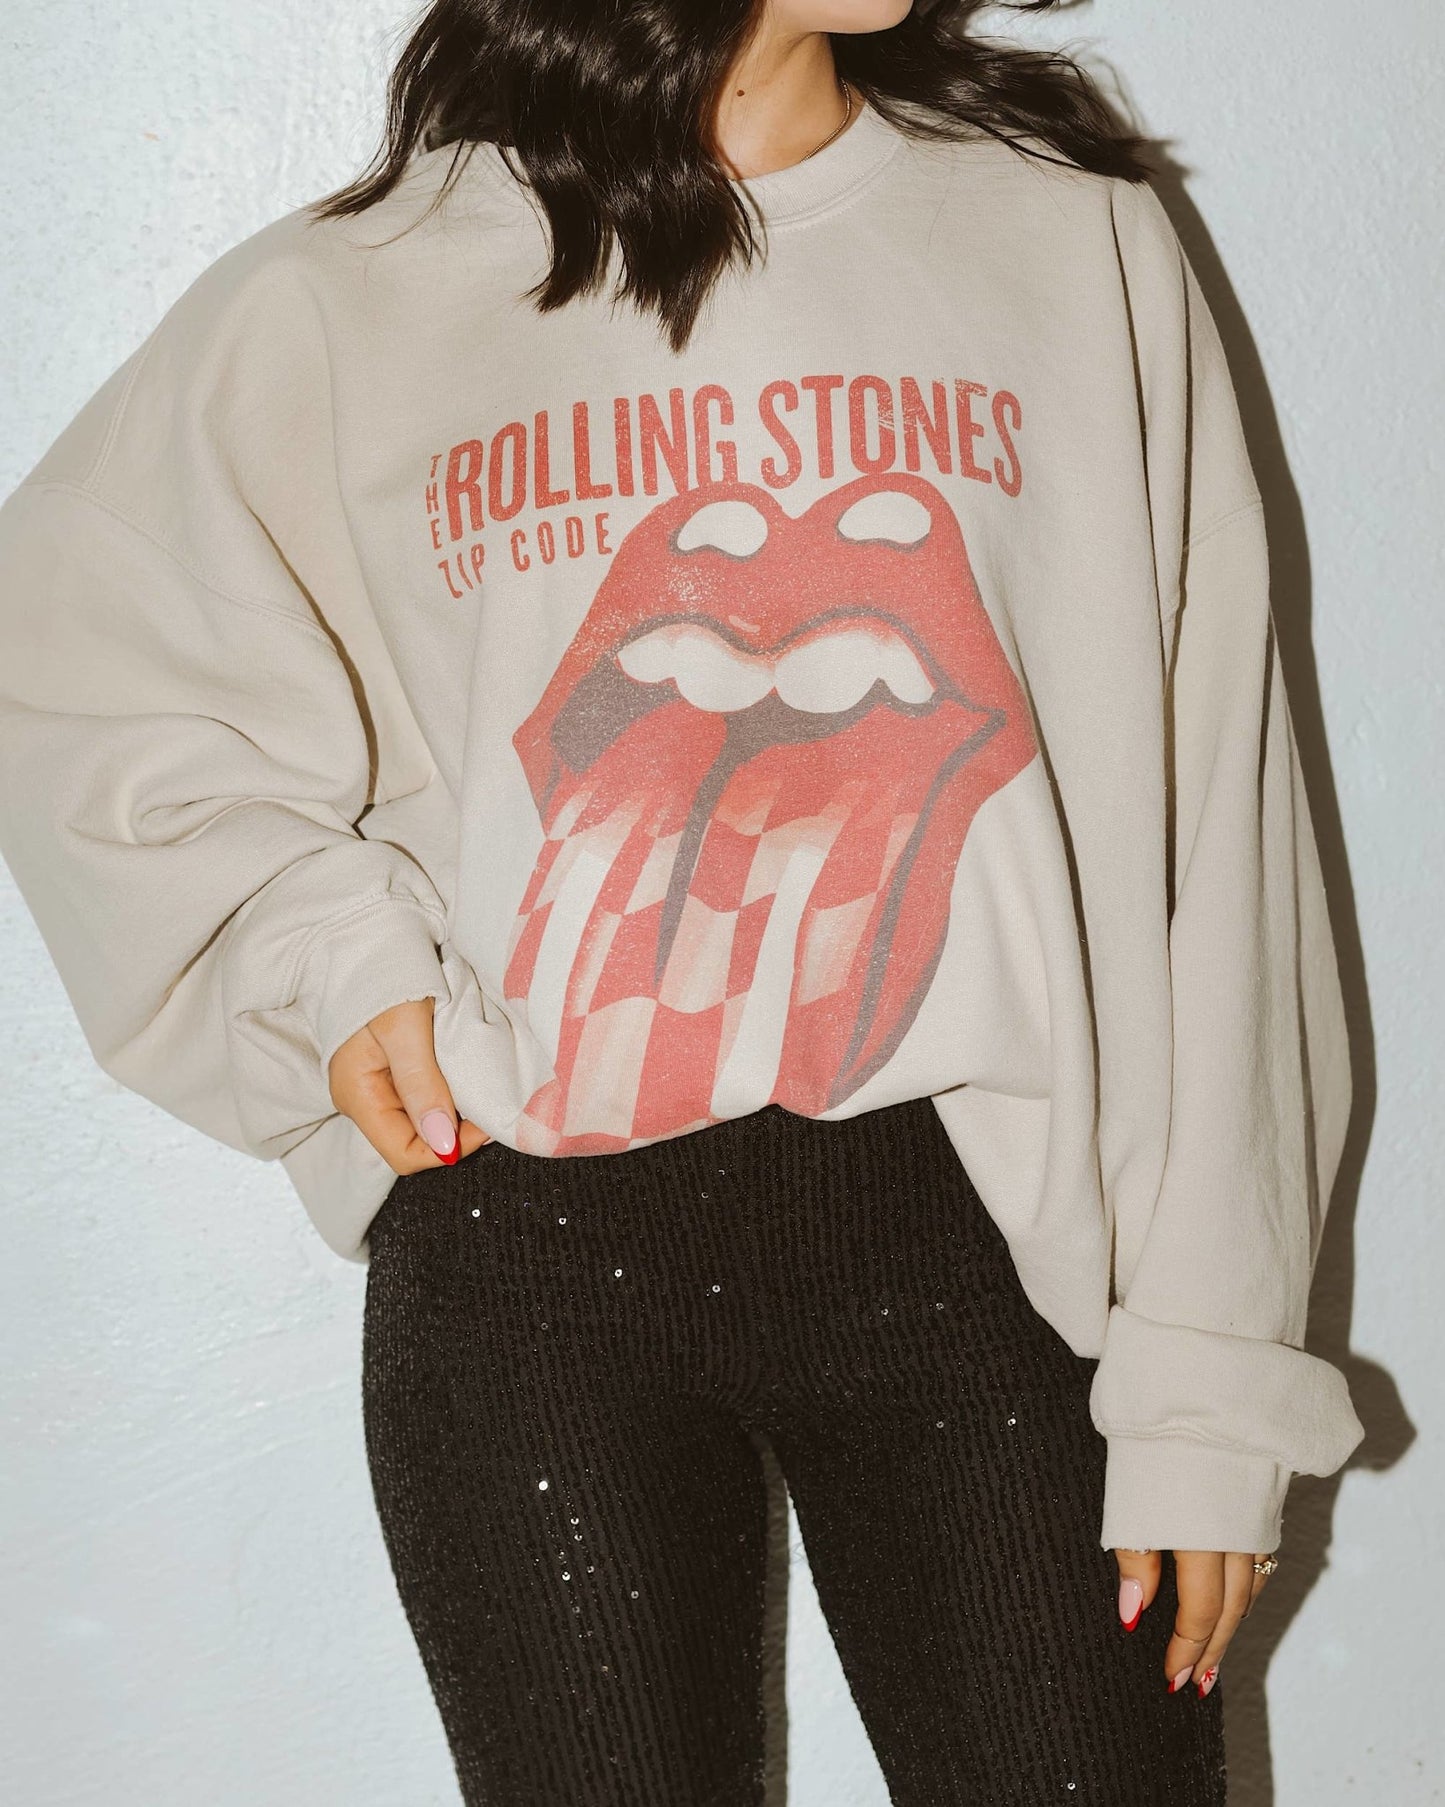 The Rolling Stones Zip Code Sweater - LivyLu - the friday collective